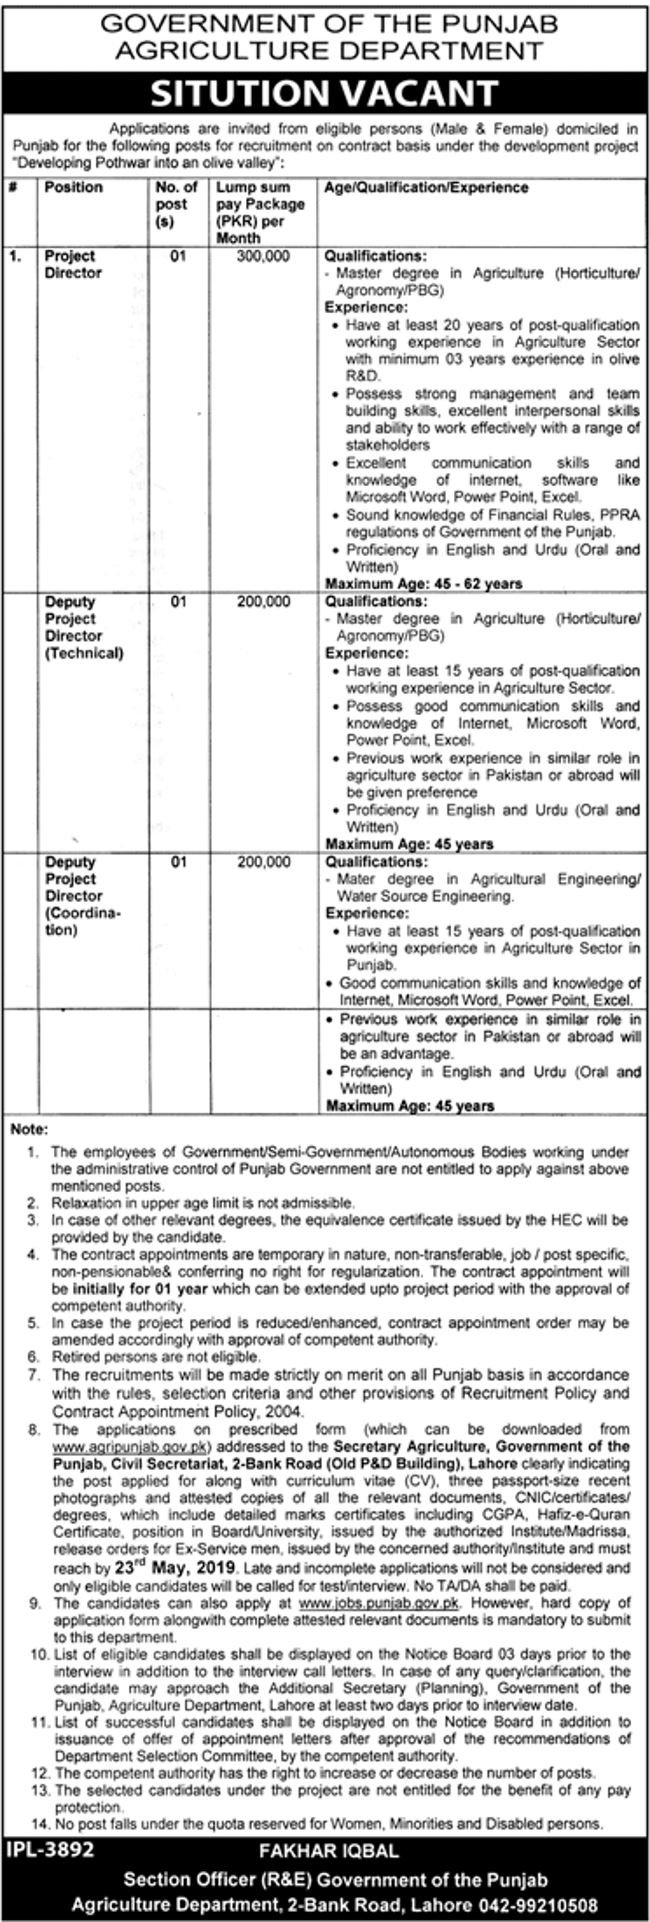 Agriculture Department Punjab Jobs 2019 for Project Director and Deputy Project Directors